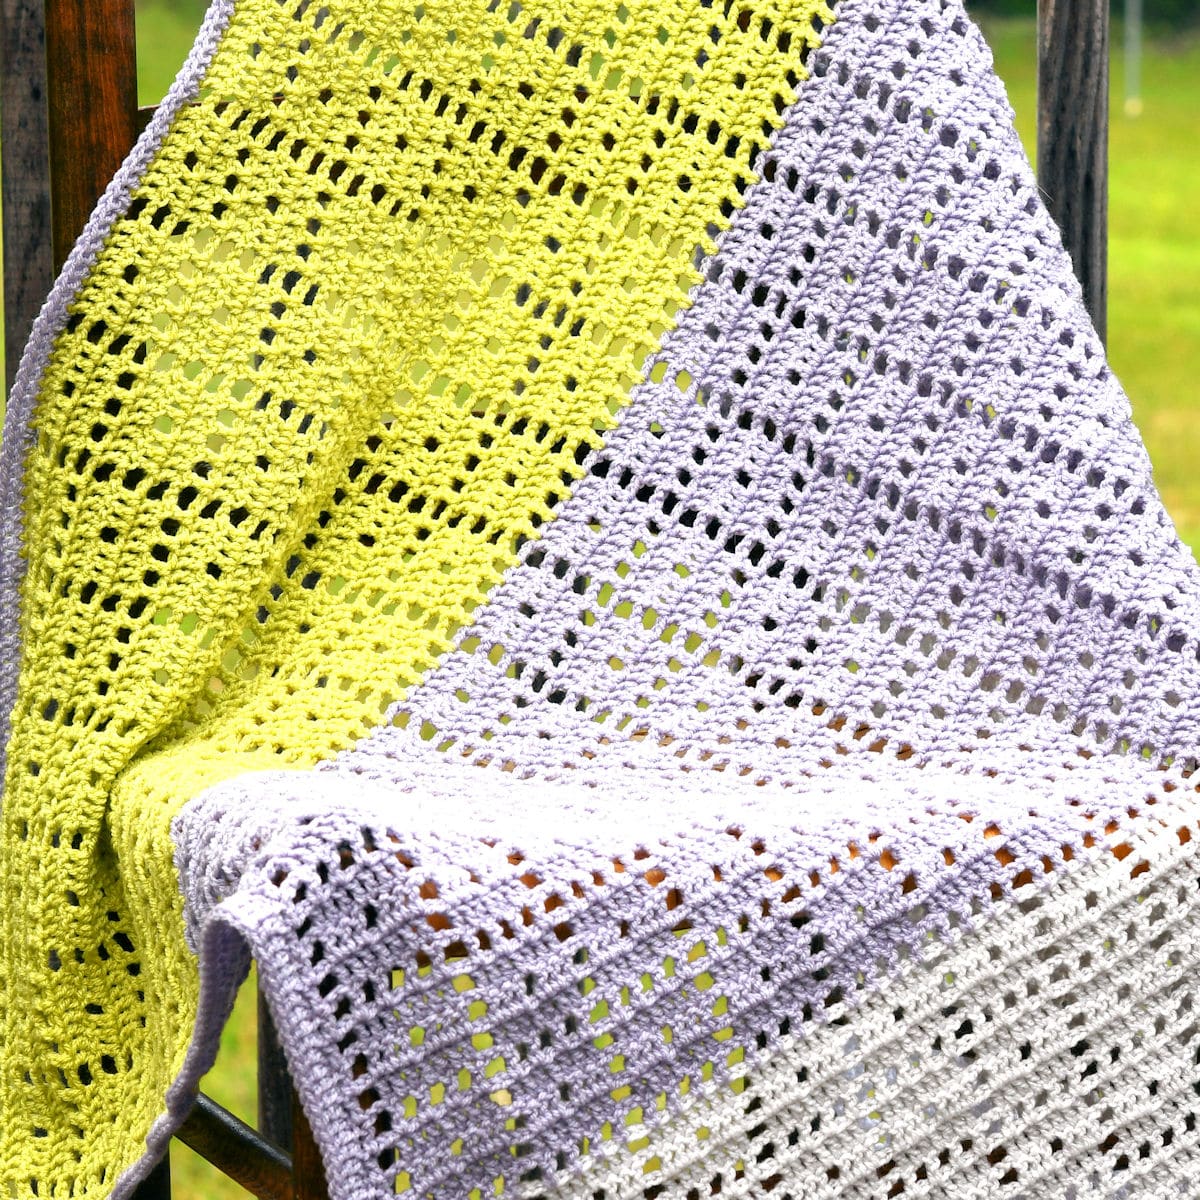 filet crochet baby afghan draped over a chair